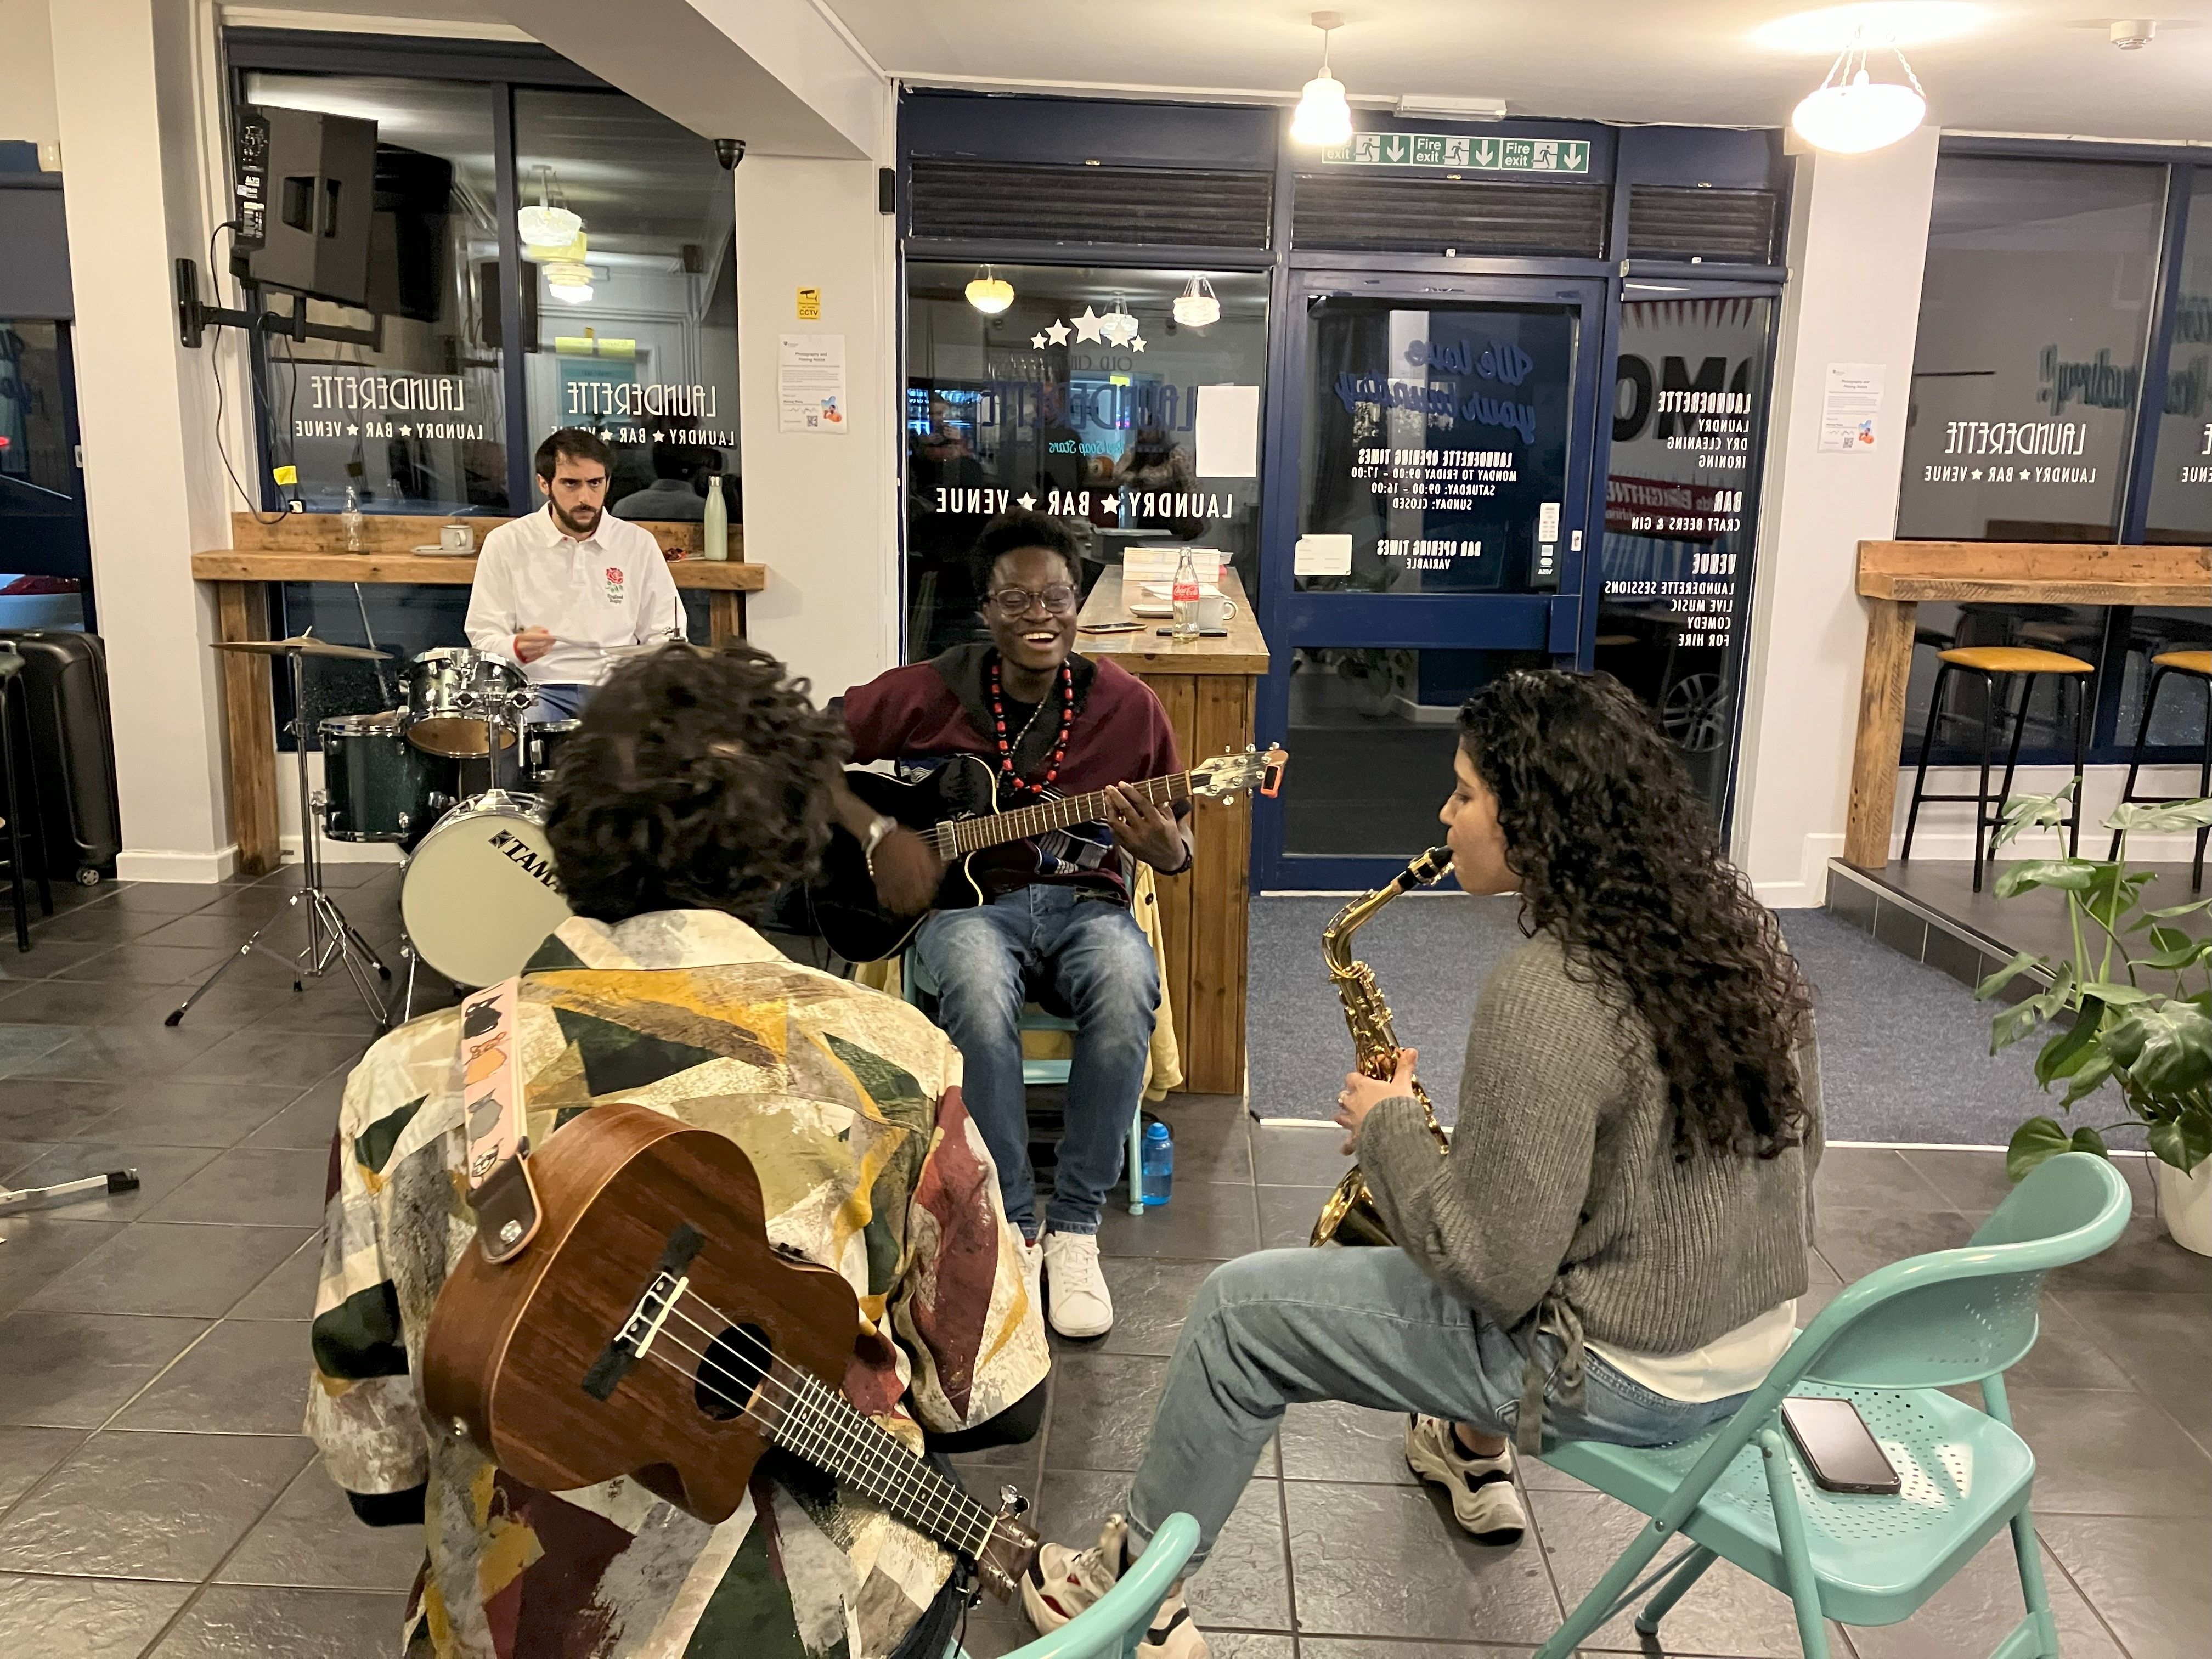 Jam-Session with students and musicians from Durham at Old Cinema Launderette in Gilesgate